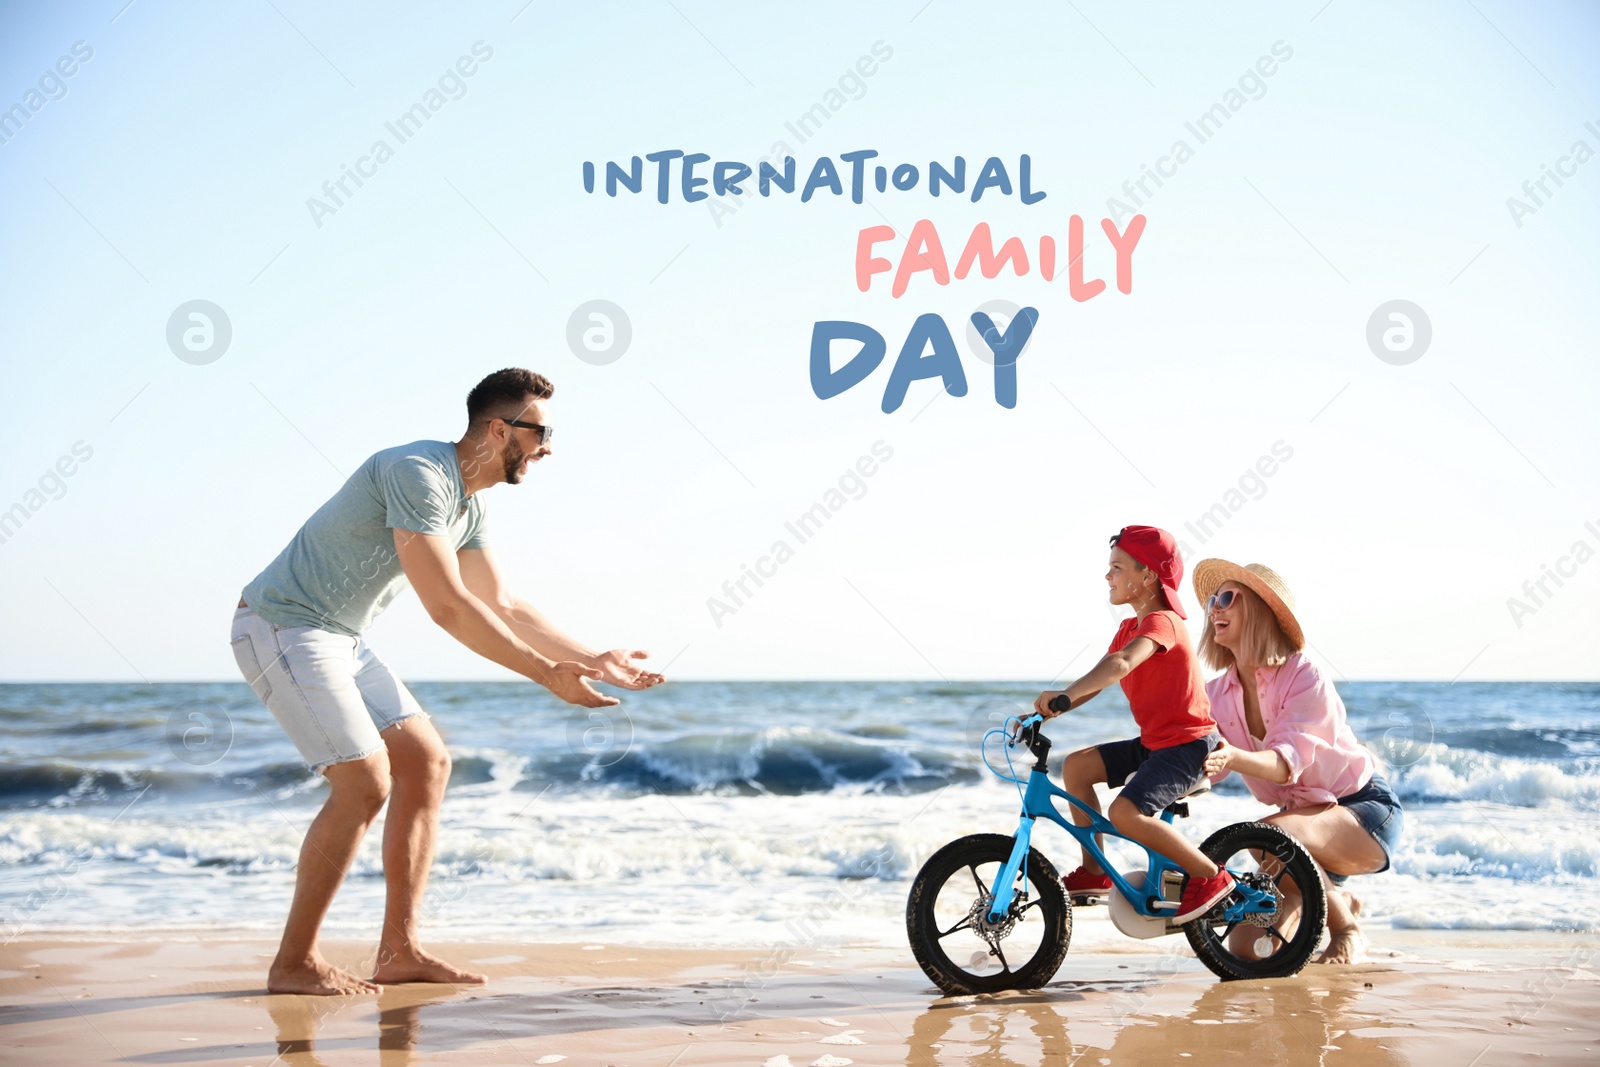 Image of Happy parents teaching son to ride bicycle on sandy beach near sea. Happy Family Day